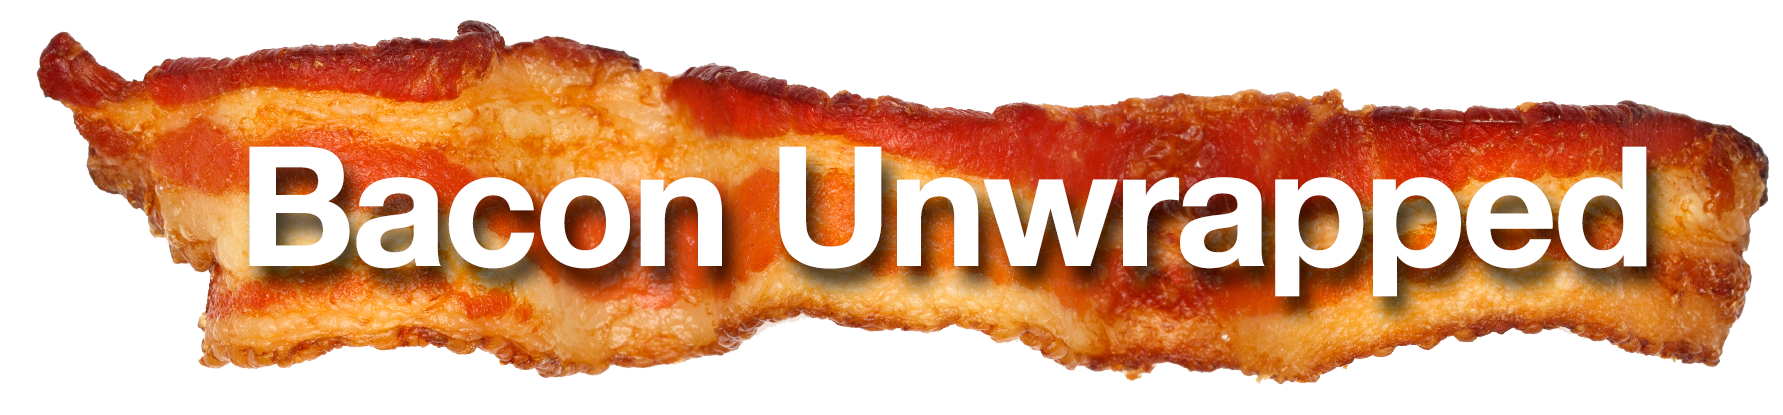 Bacon Unwrapped